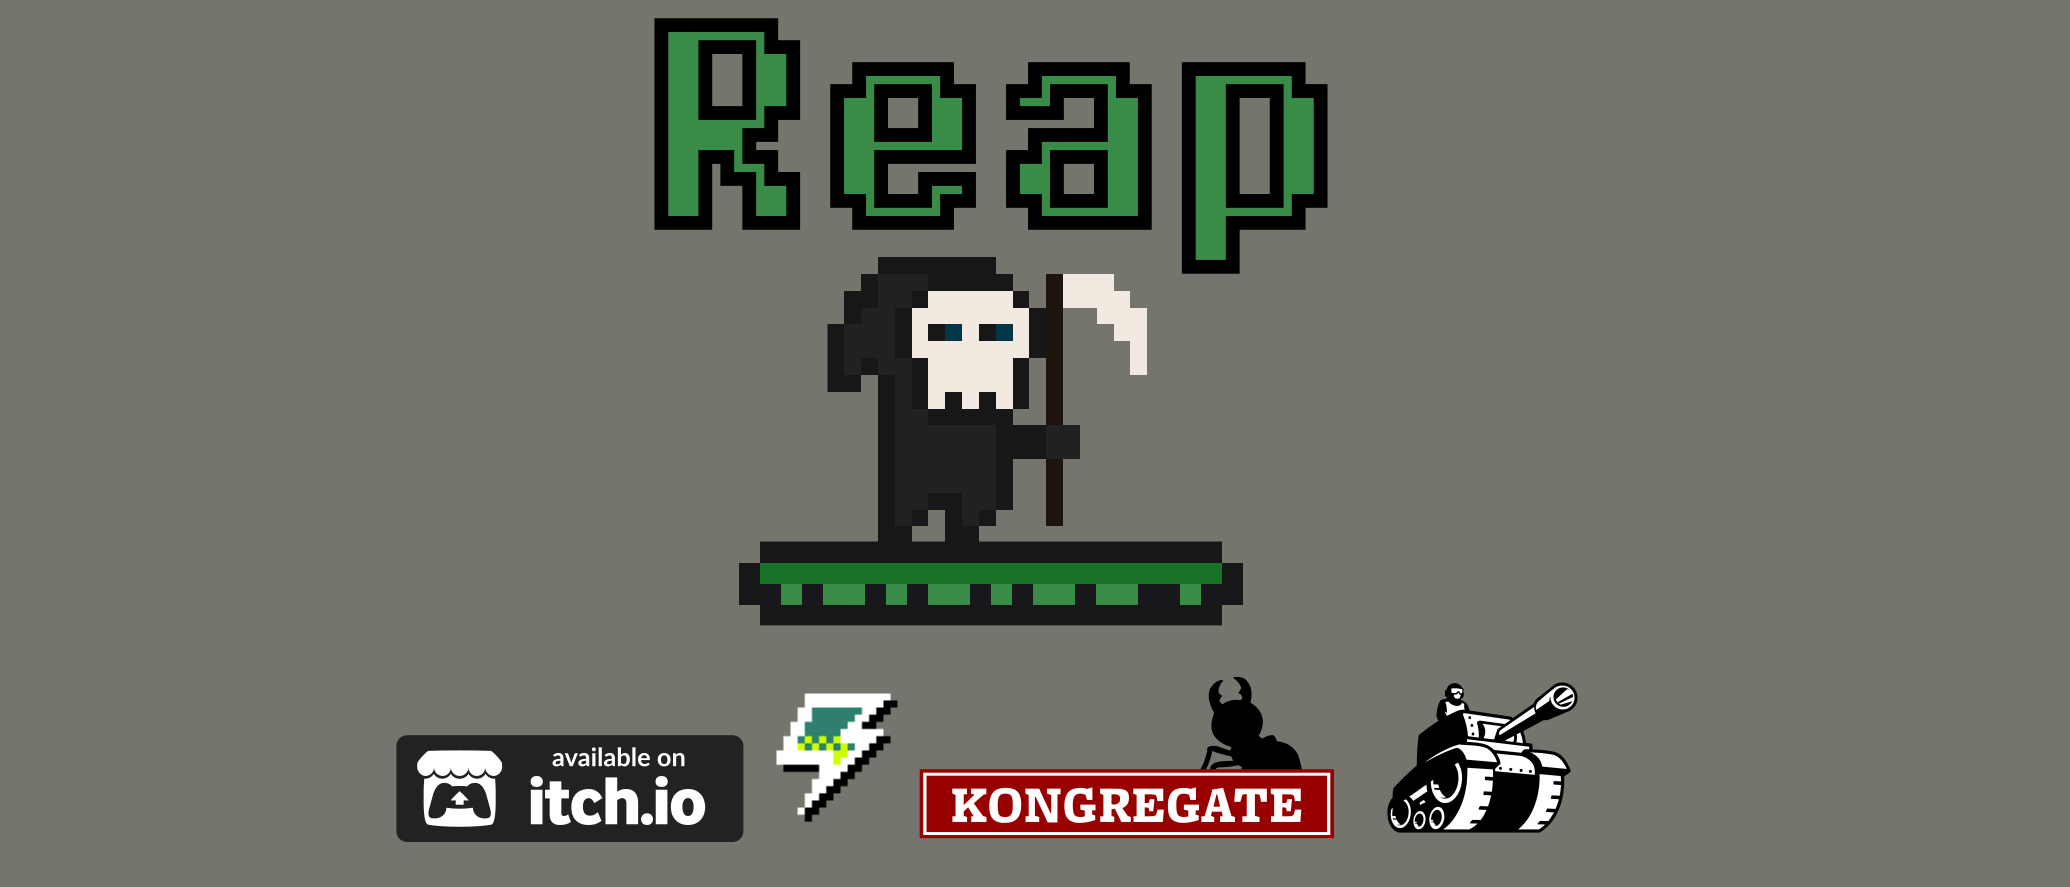 Reap is released!